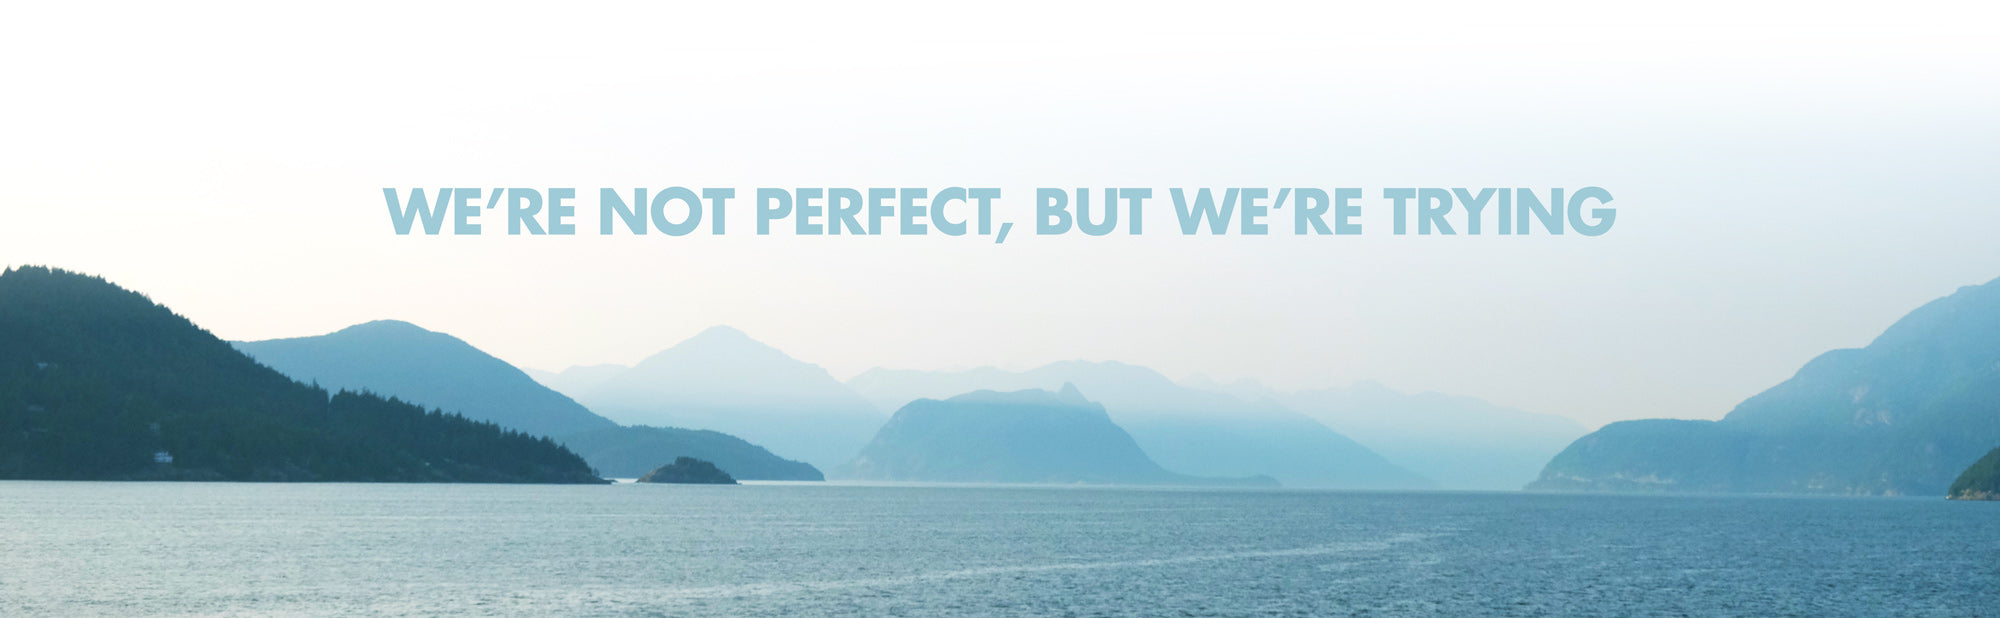 We're Not Perfect, But We're Trying  |  Radically Better Underwear